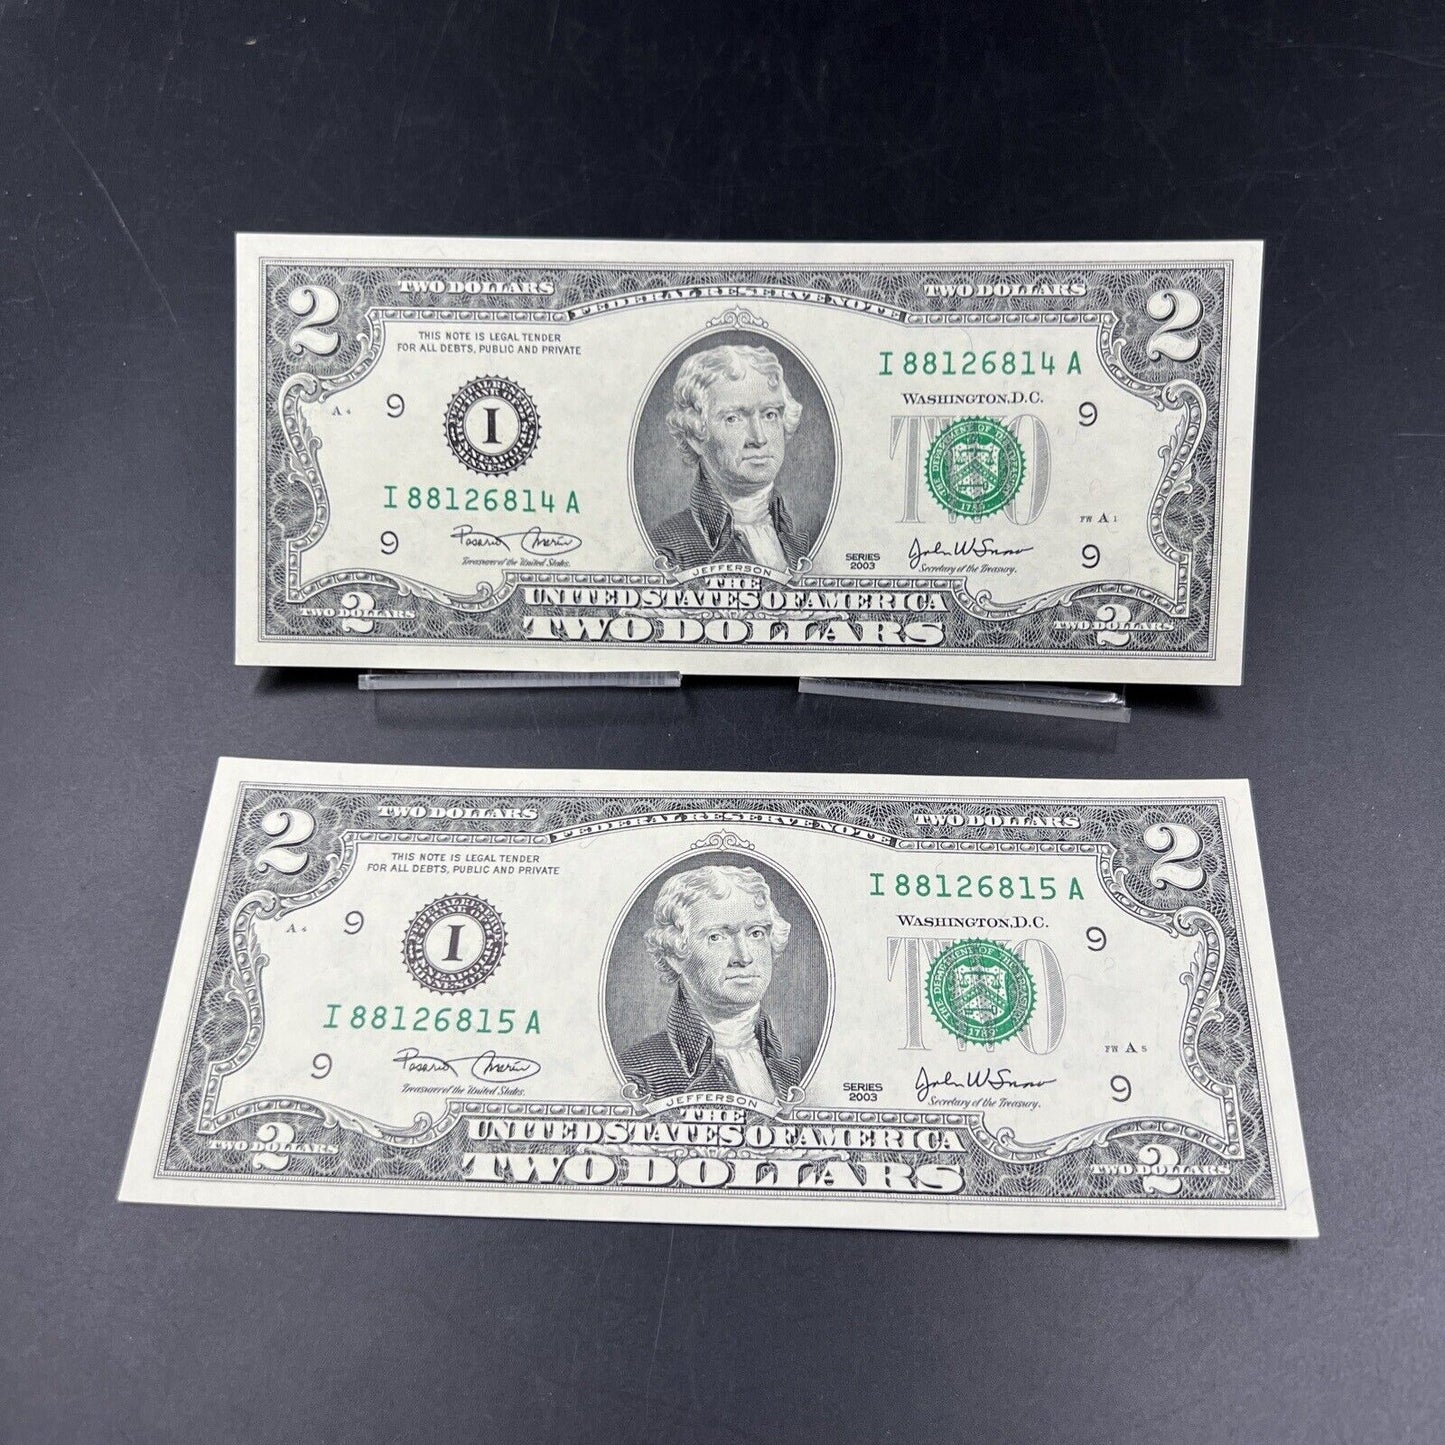 Lot of 2 2003 $2 Two Dollar FRN Federal Reserve Note Bills NEAT Serial #881